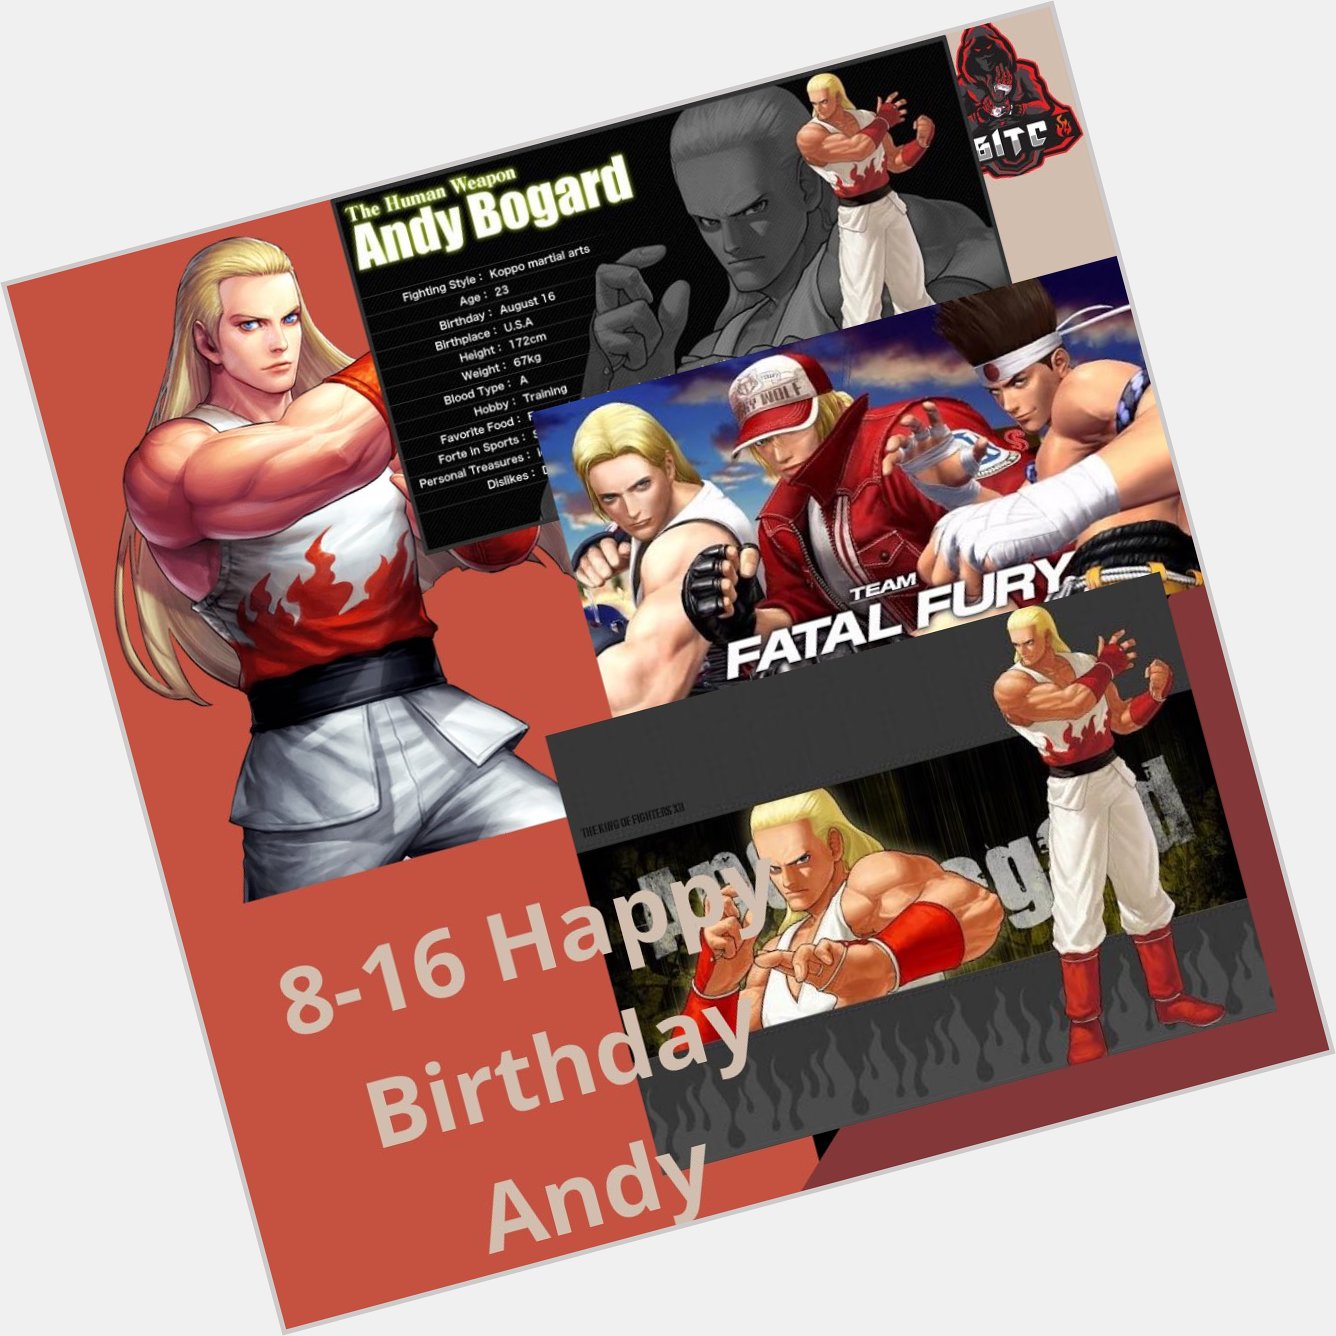 8-16 Happy Birthday to the fighting master Andy Bogard 